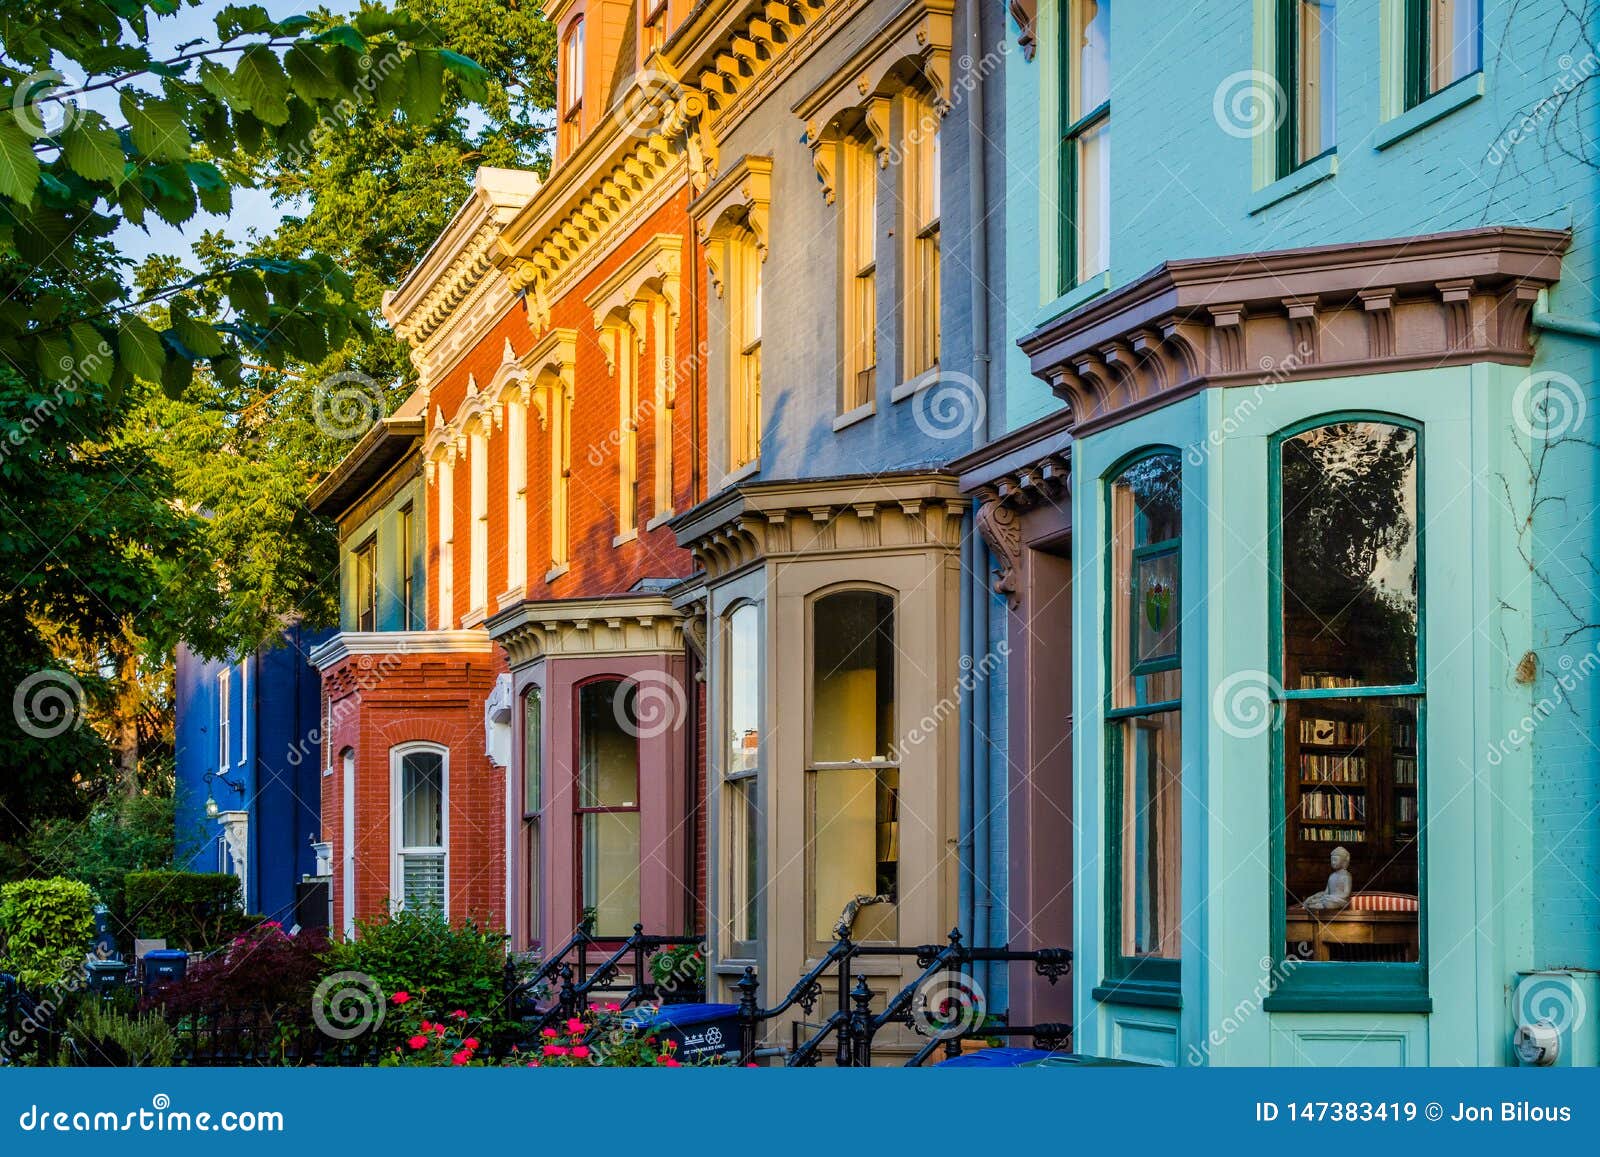 colorful row houses independence avenue capitol hill washington dc 147383419